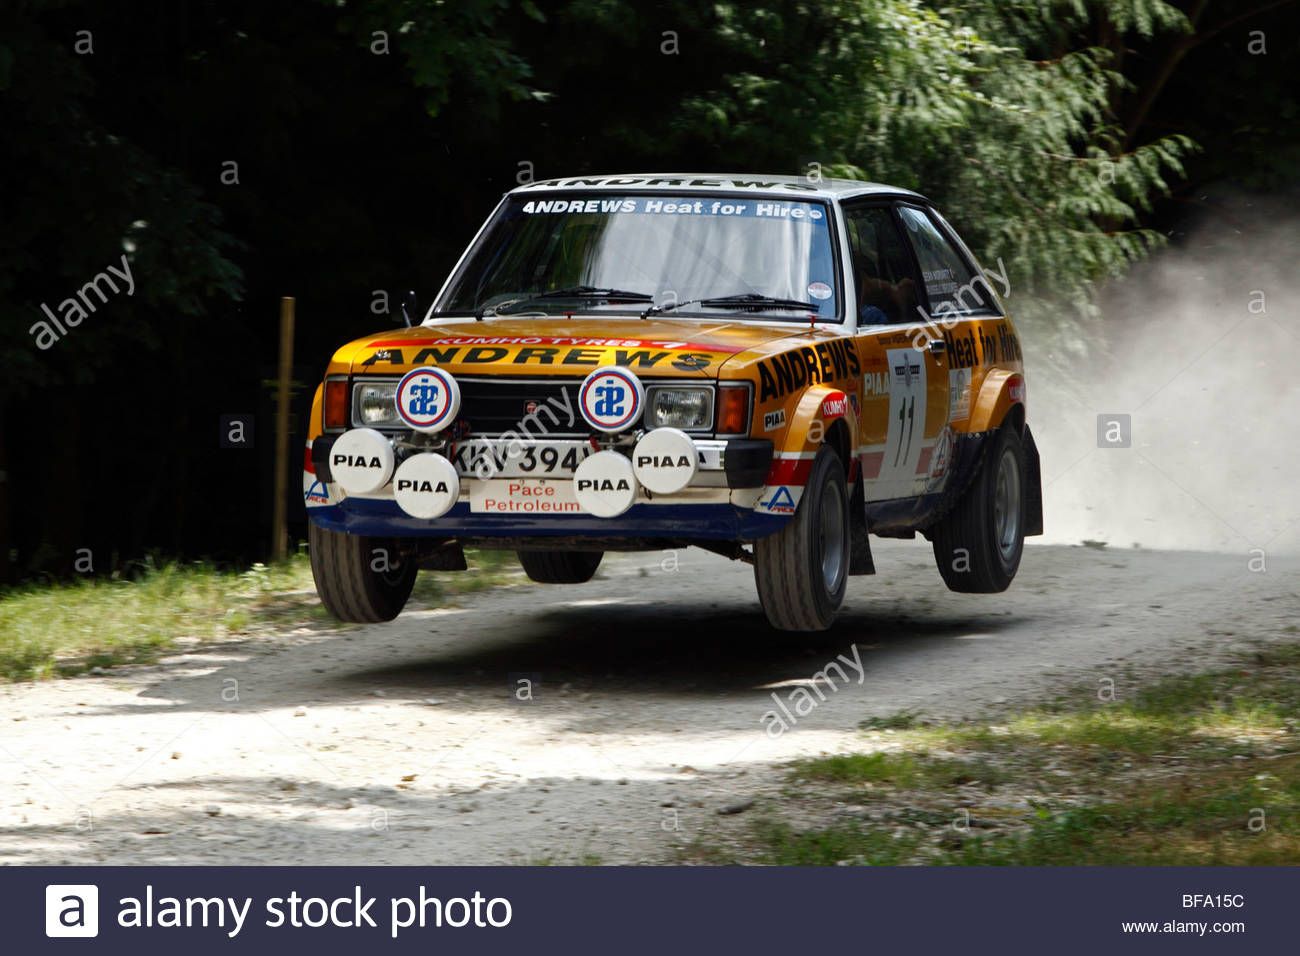 talbot-sunbeam-lotus-driven-by-russell-brookes-over-the-jump-on-the-BFA15C.jpg